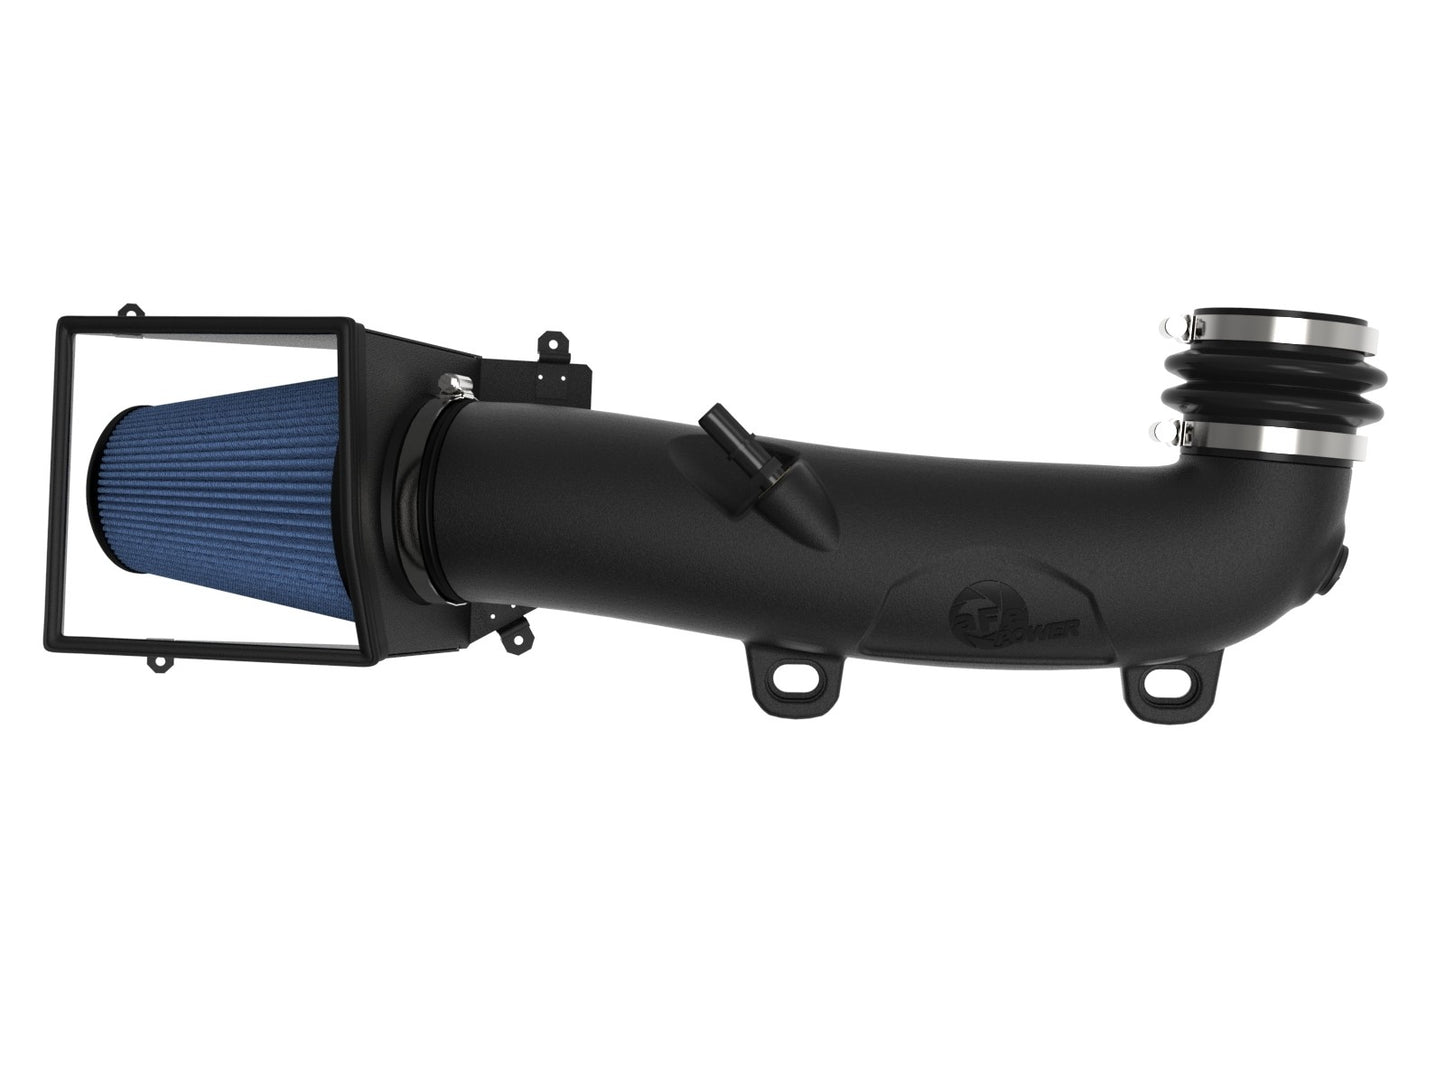 Rapid Induction Cold Air Intake System w/ Pro 5R Filter